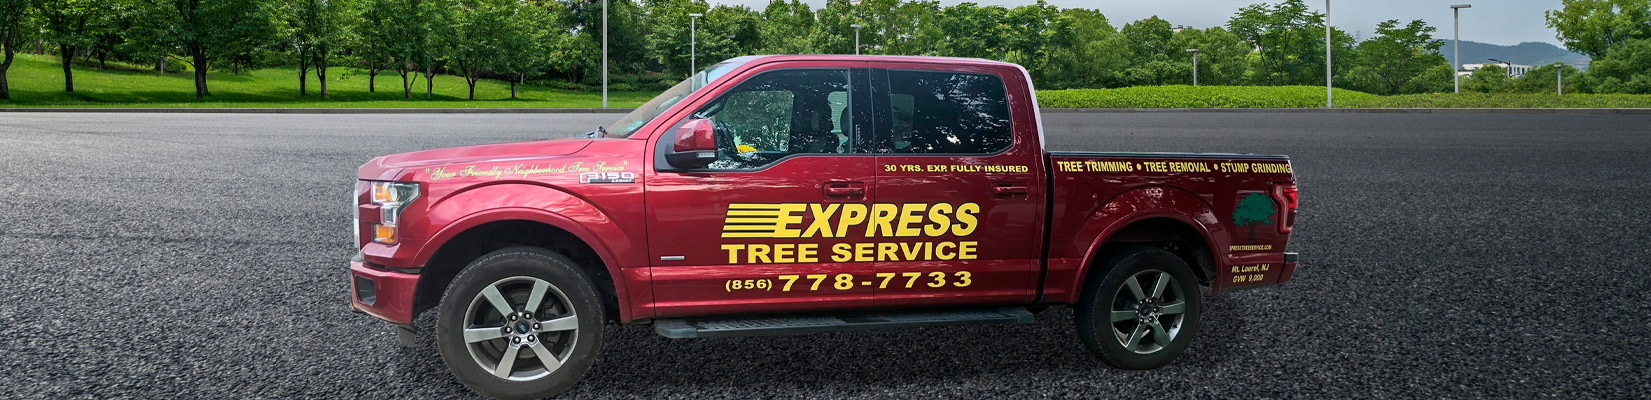 South Jersey Tree Service Company Launches Website